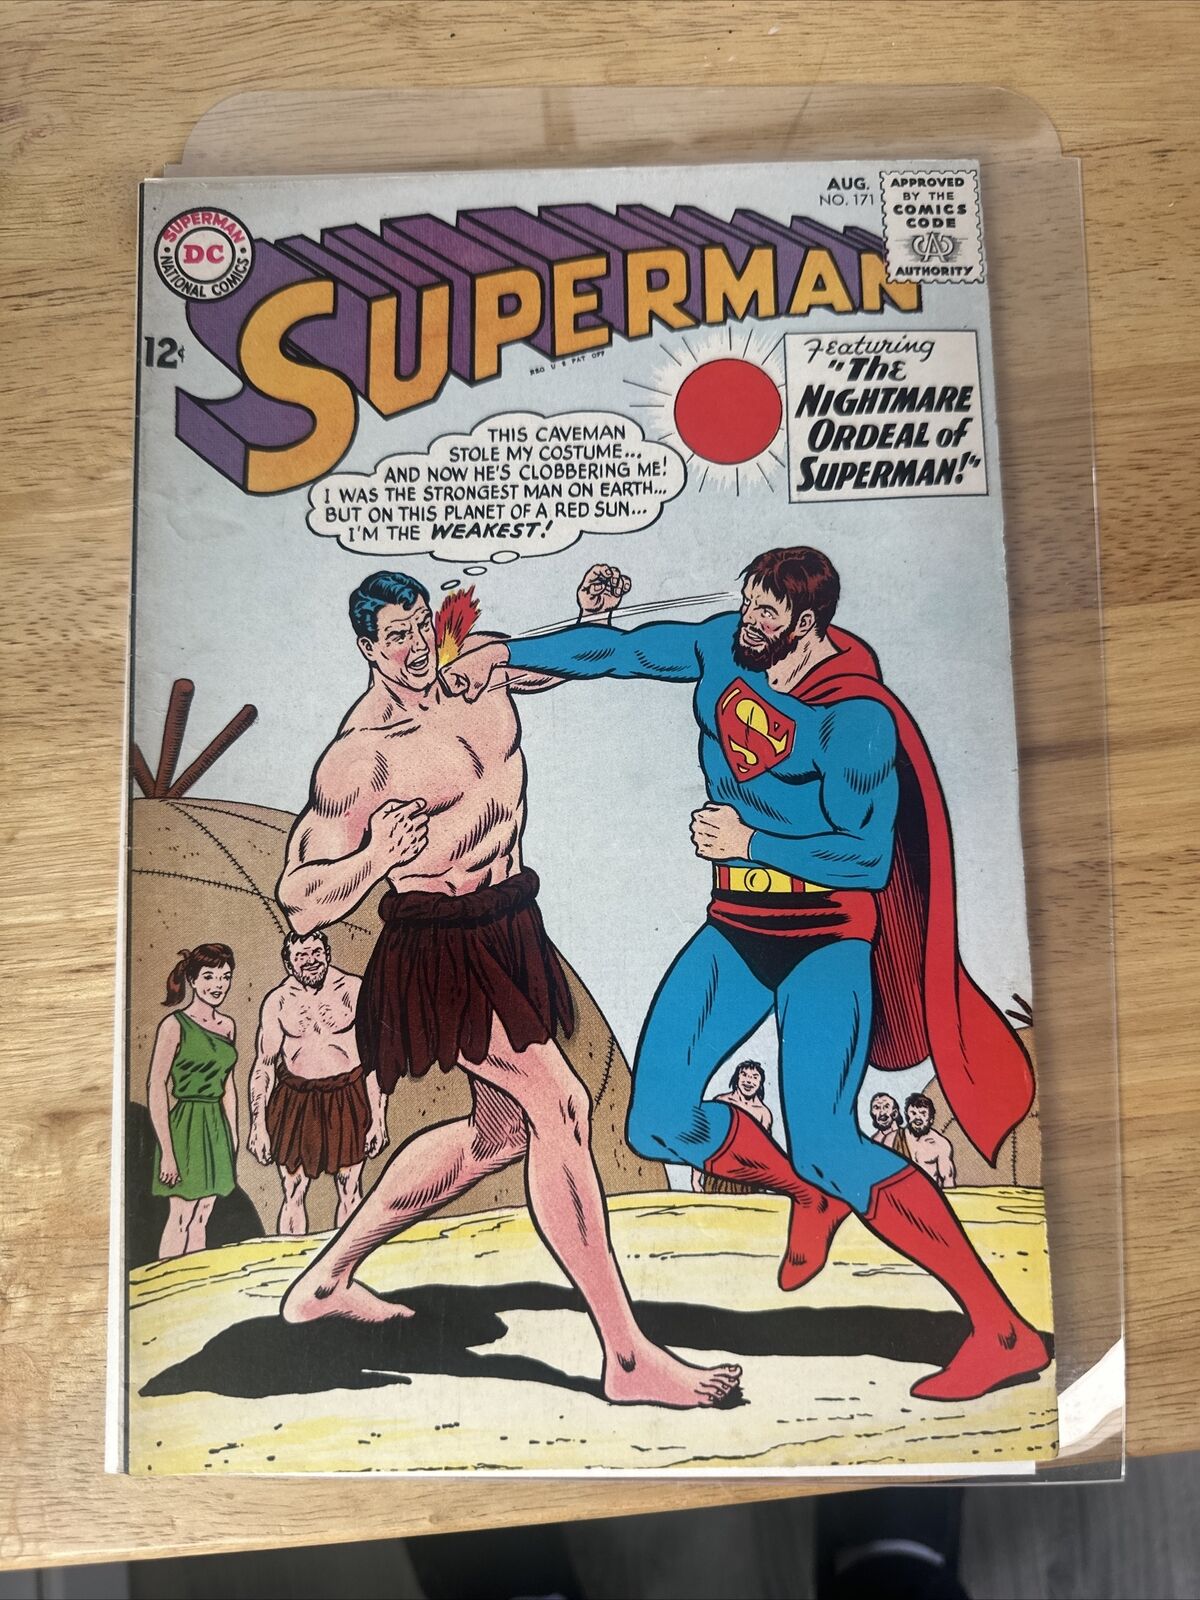 SUPERMAN #171 DC comic book from 1964 in fantastic condition